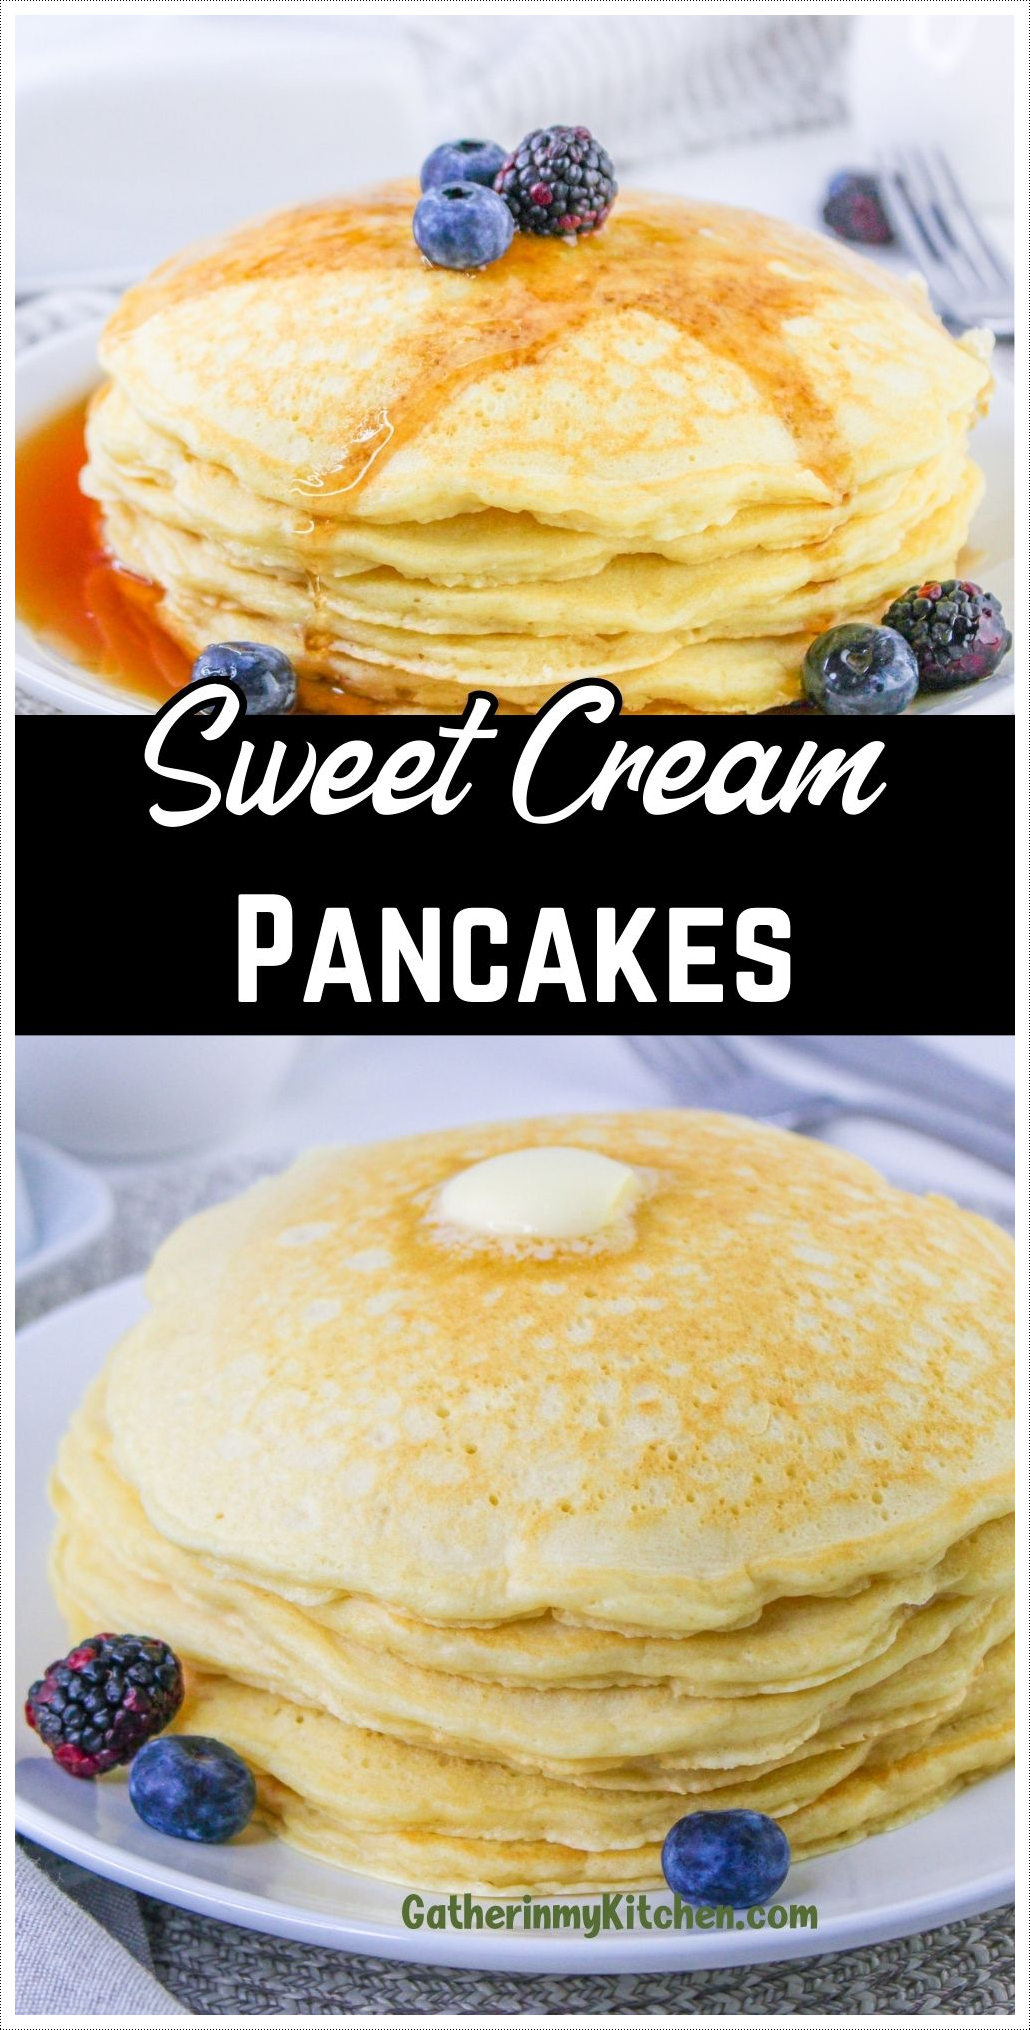 Pin image: top is a pile of pancakes with berries and syrup on it, bottom is a pile of pancakes with butter and the middle says "Sweet Cream Pancakes".